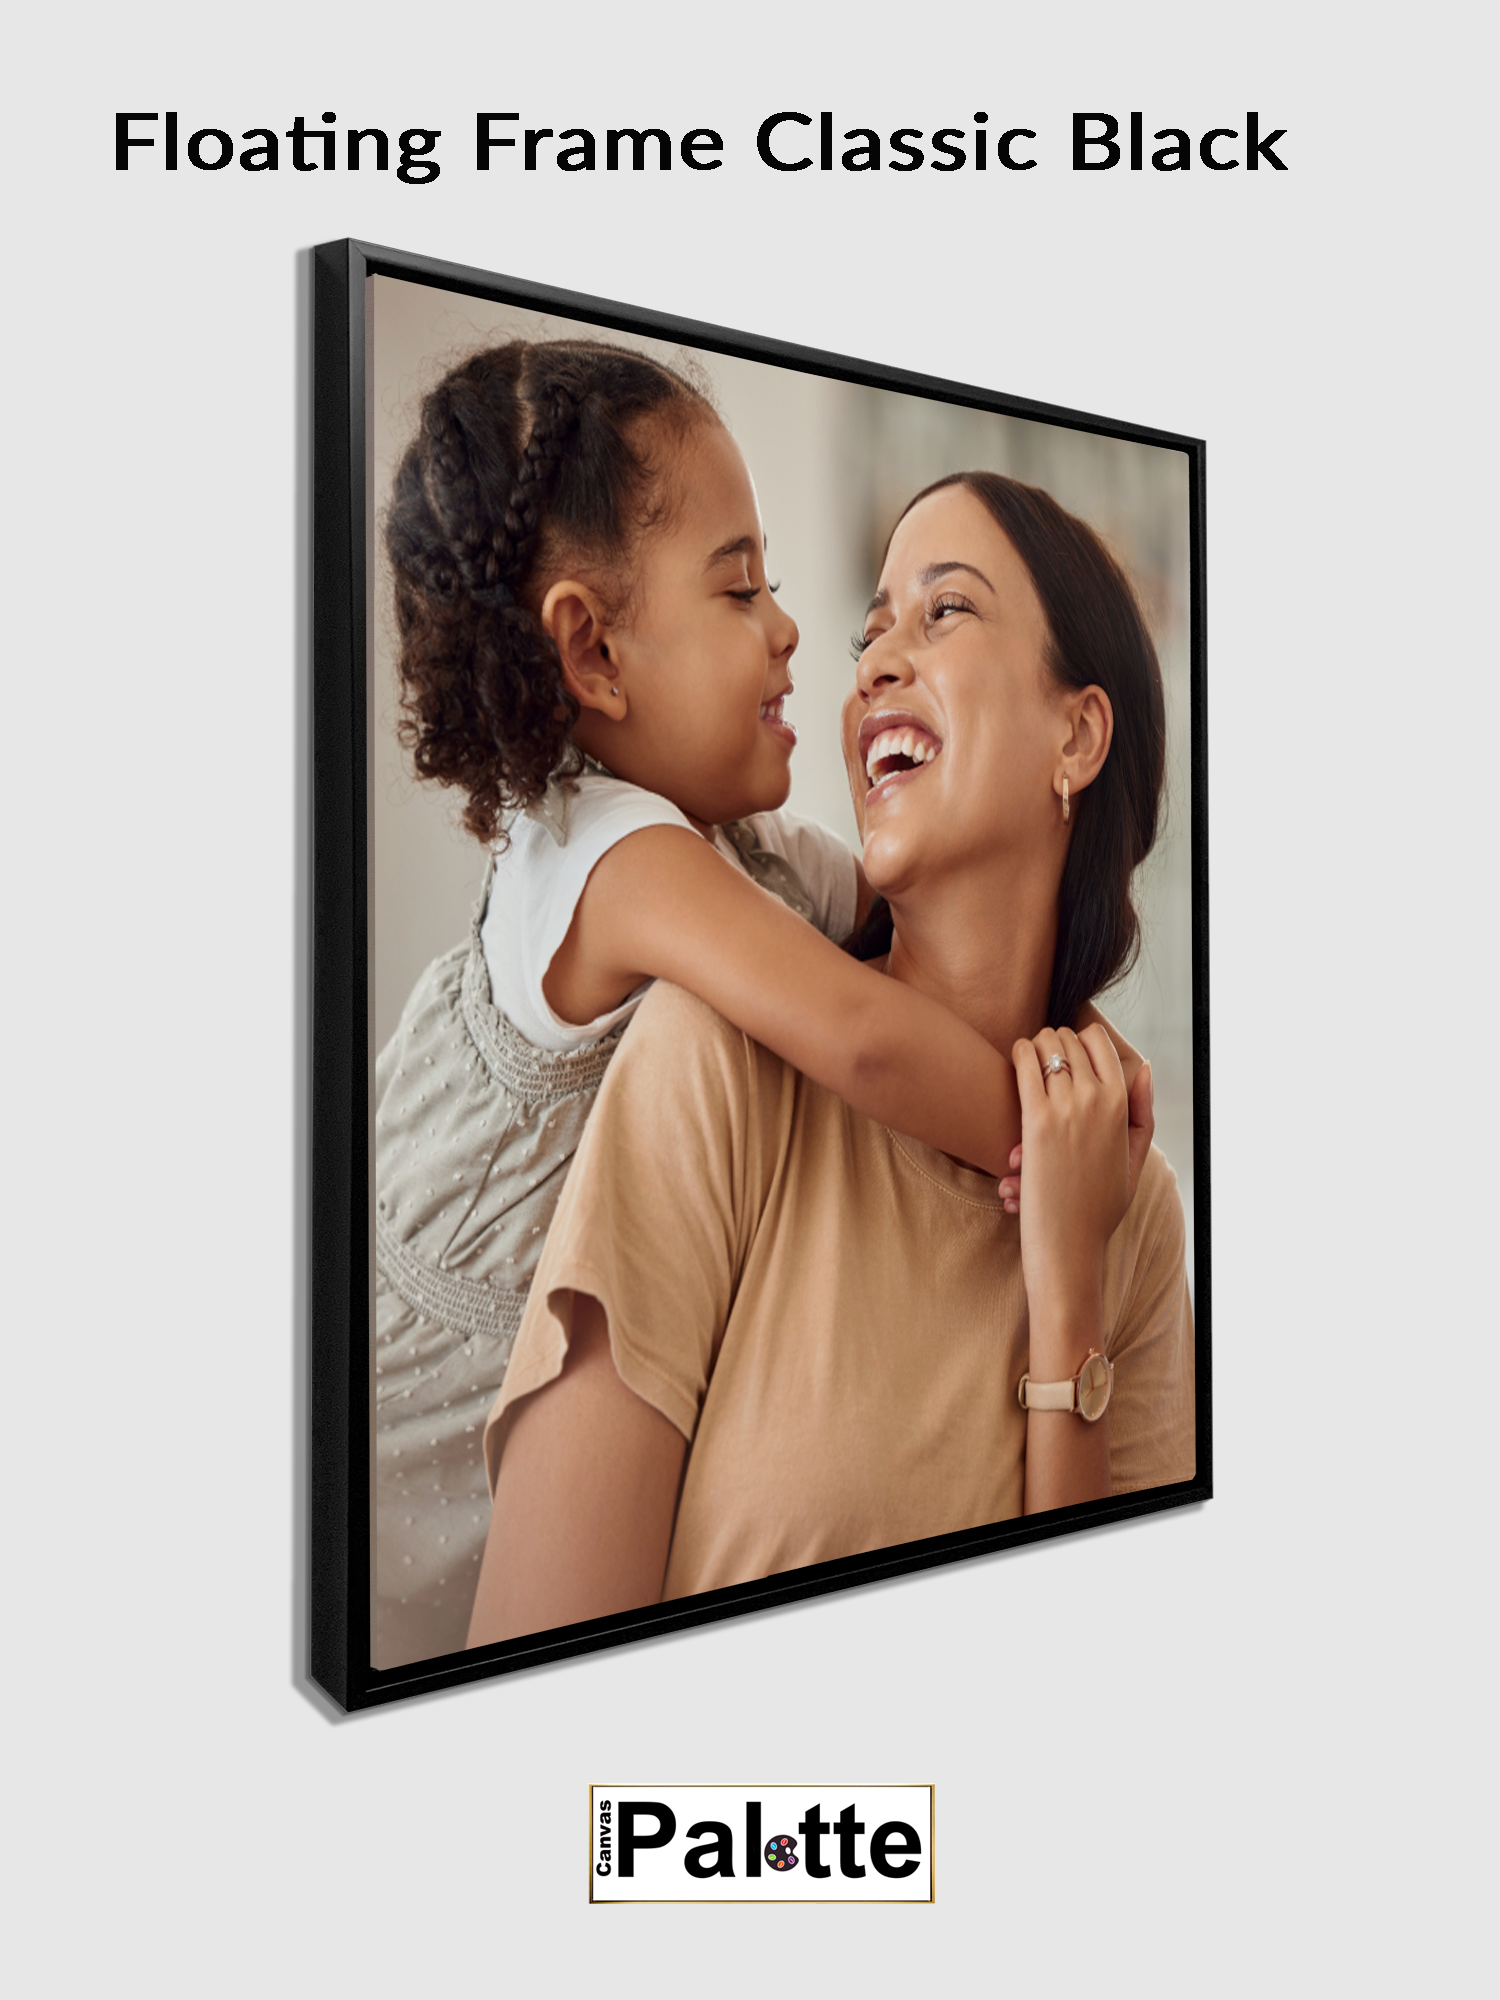 Canvas Palette example of a black floating side frame for canvas framing a portrait of mother and daughter.